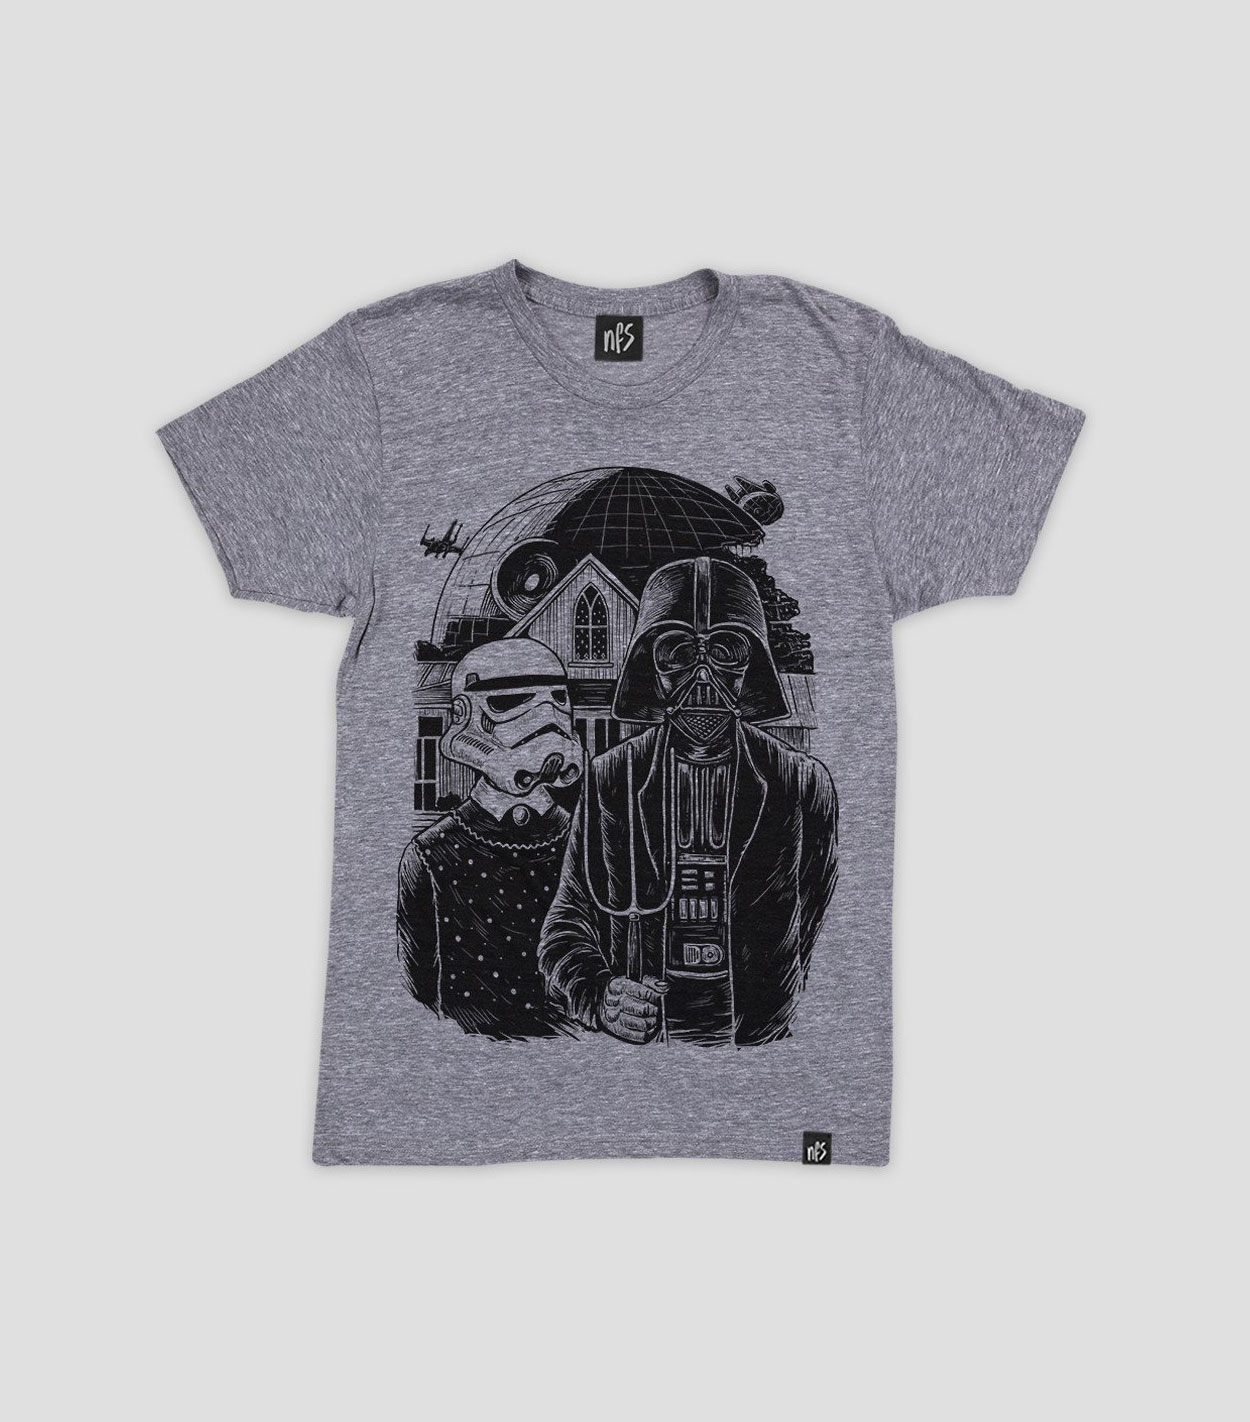 Darth Vader Meets American Gothic On This No Fit State Shirt